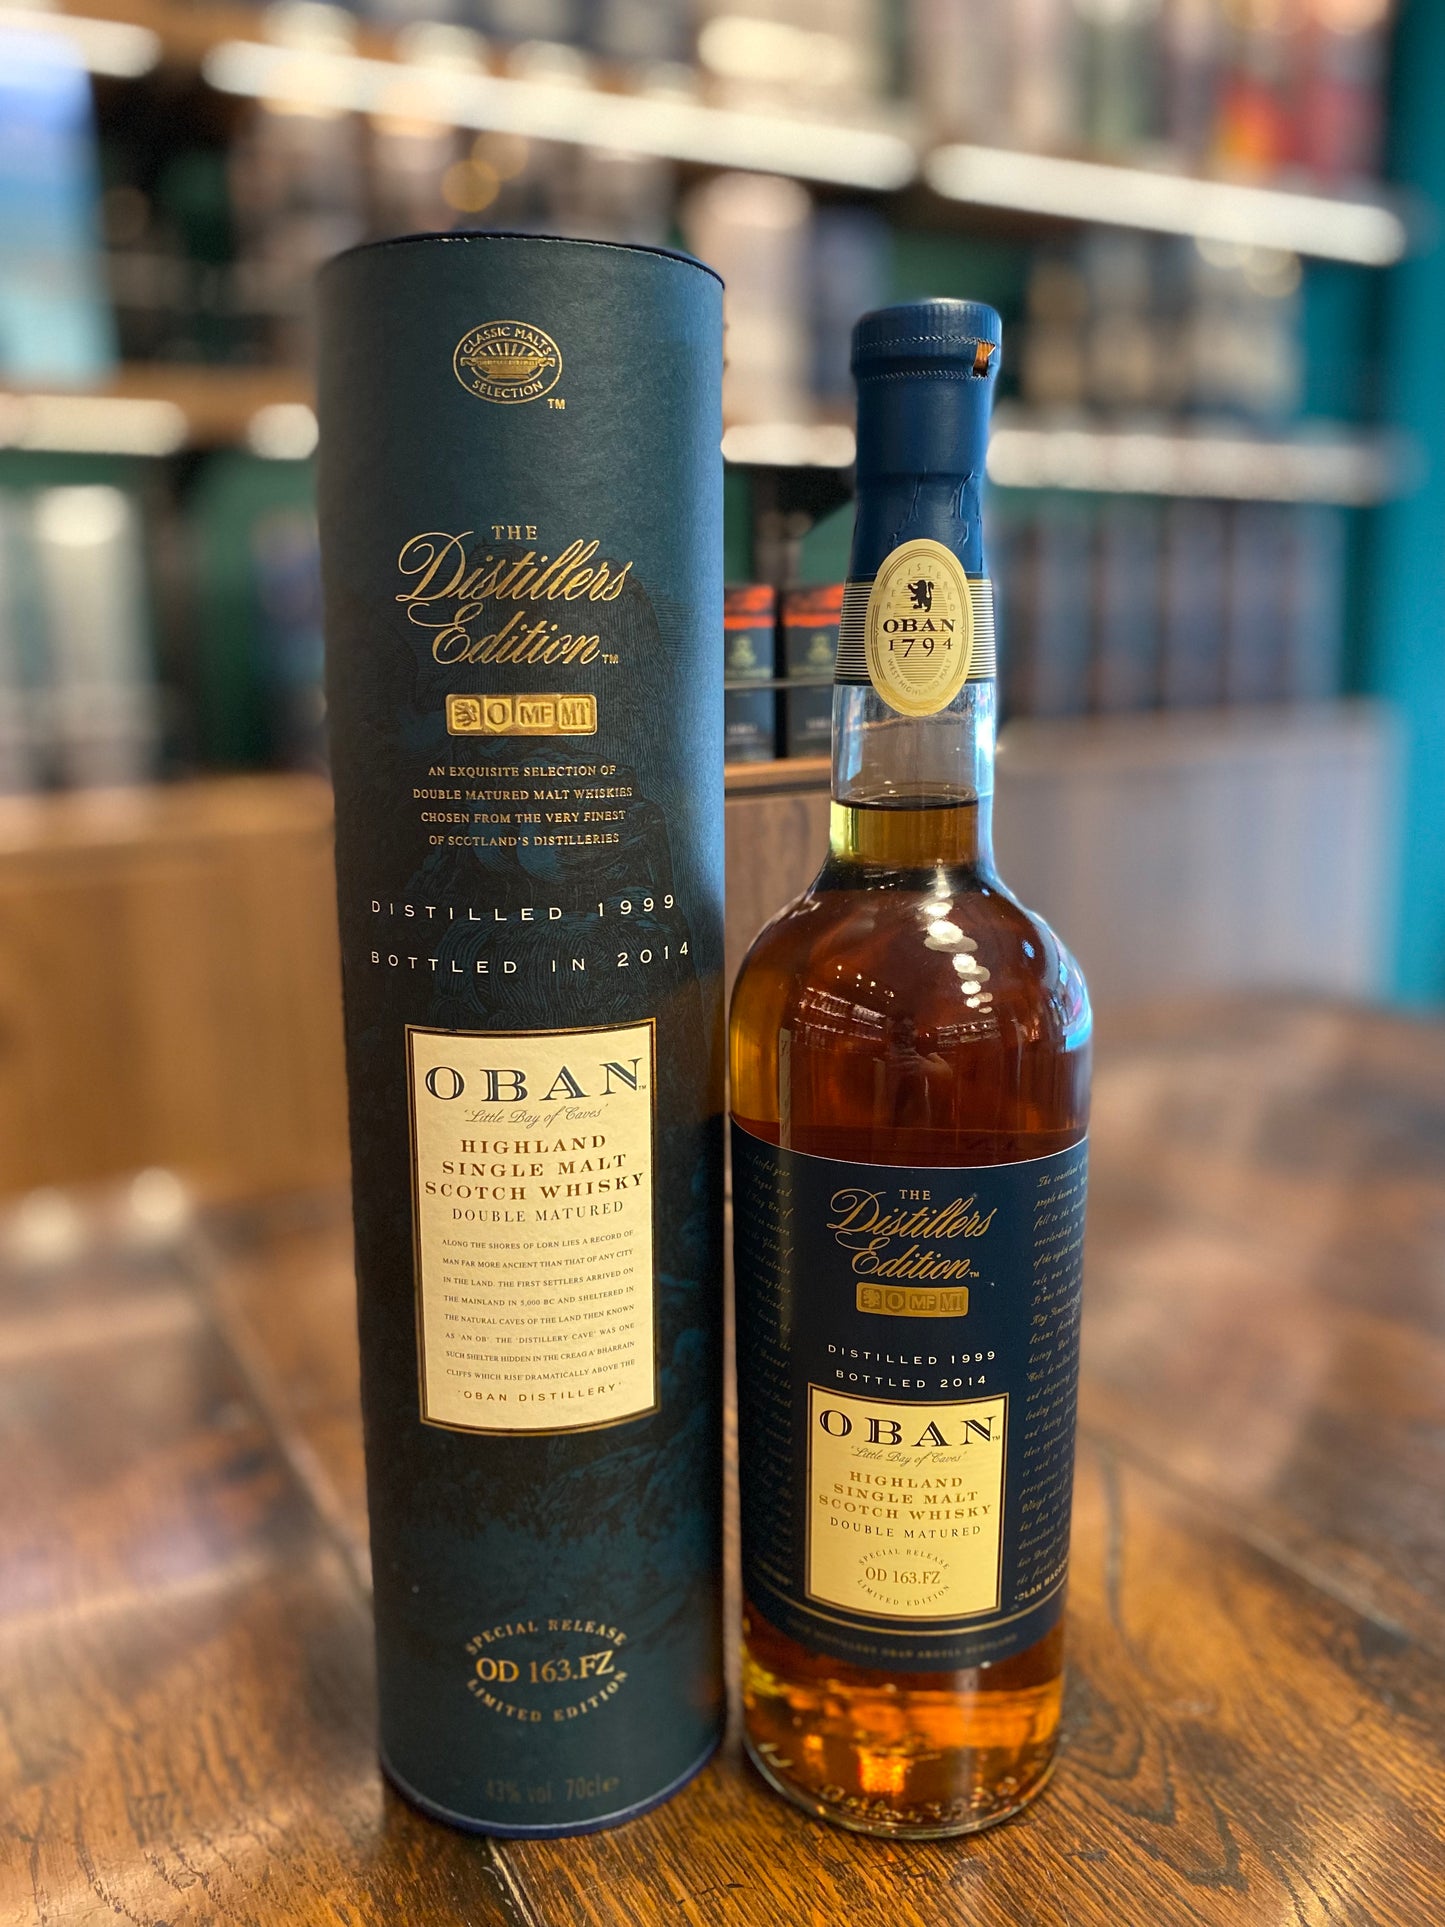 OBAN 1999 2014 - THE DISTILLERS EDITION - OD 163.FZ - SPECIAL RELEASE,700ml, 43%